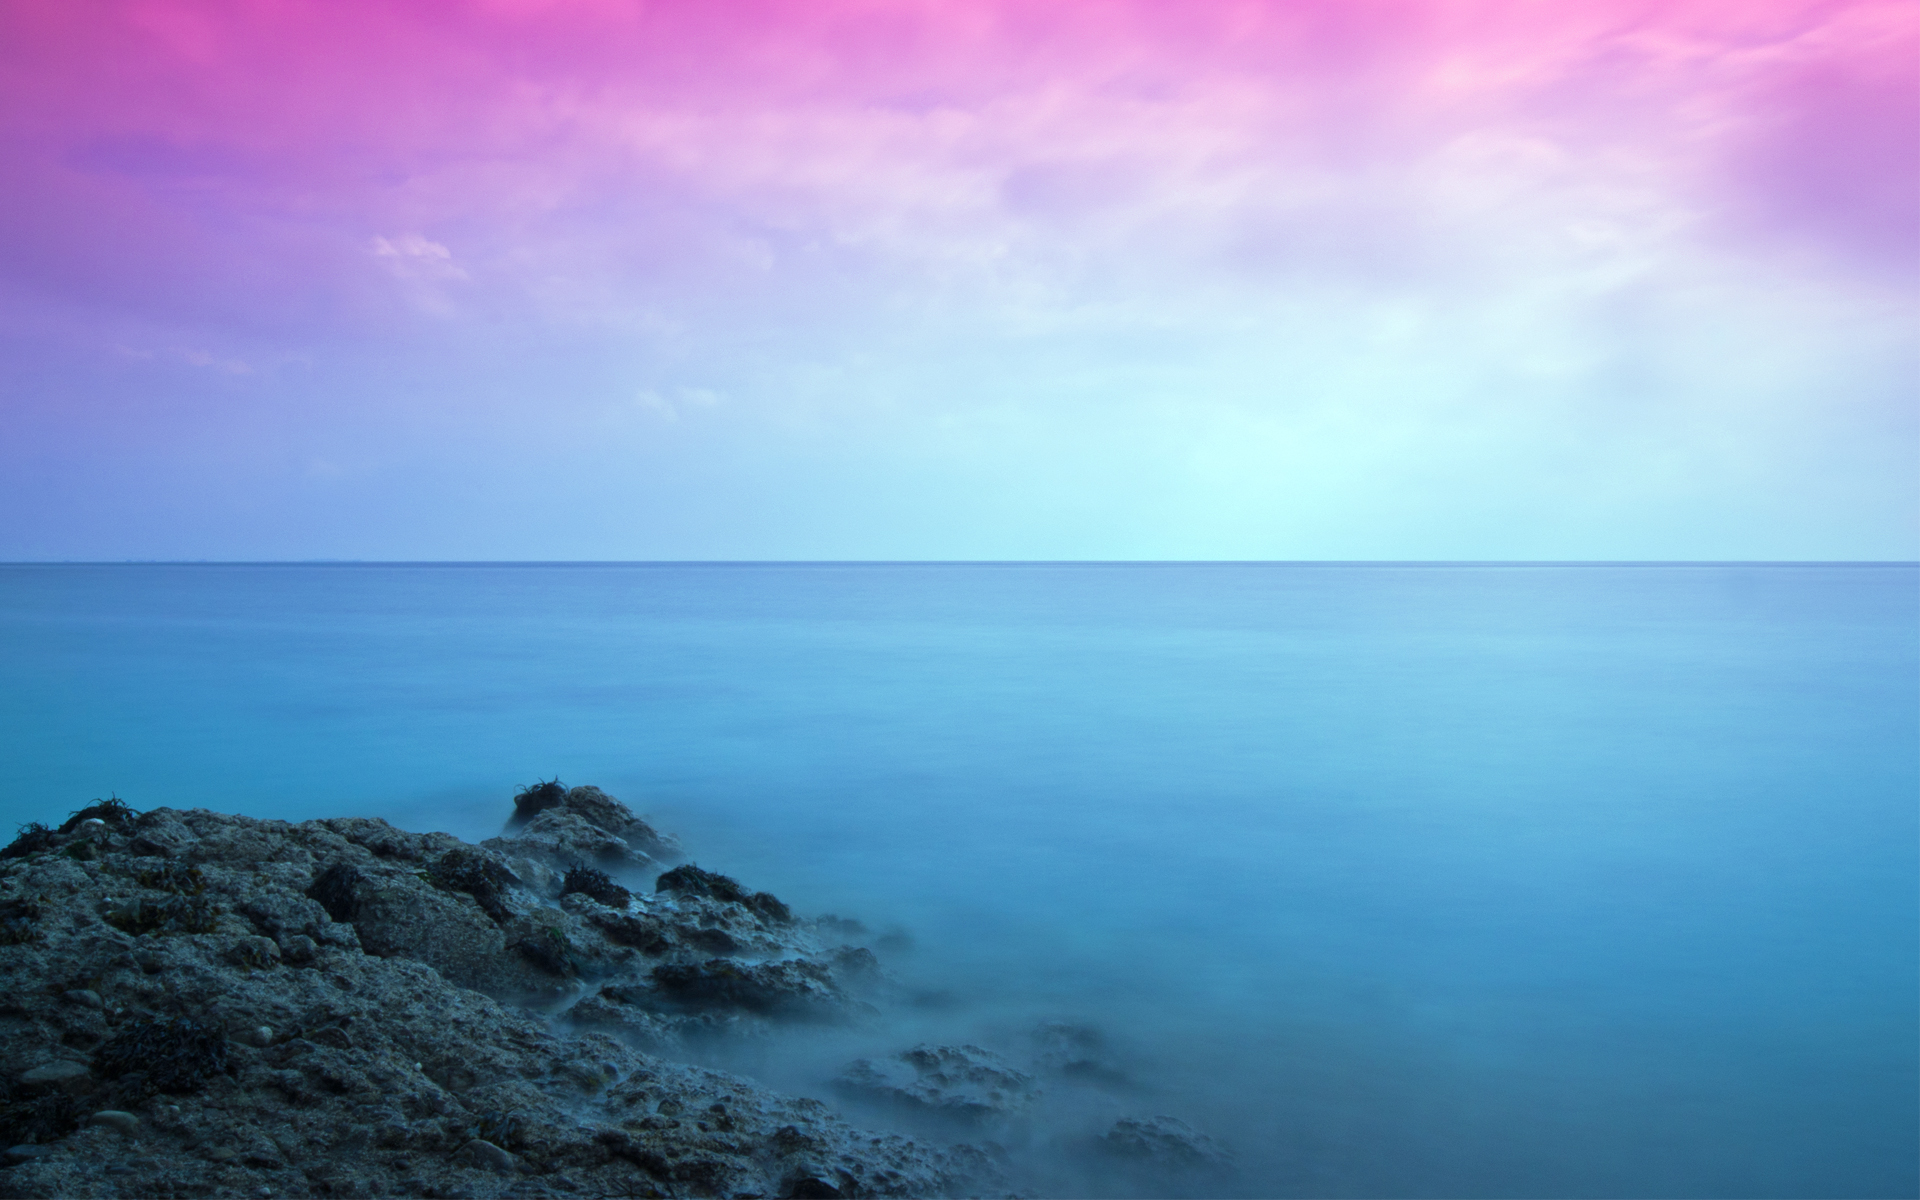 Colorful Seascape205533443 - Colorful Seascape - Waves, Seascape, Colorful